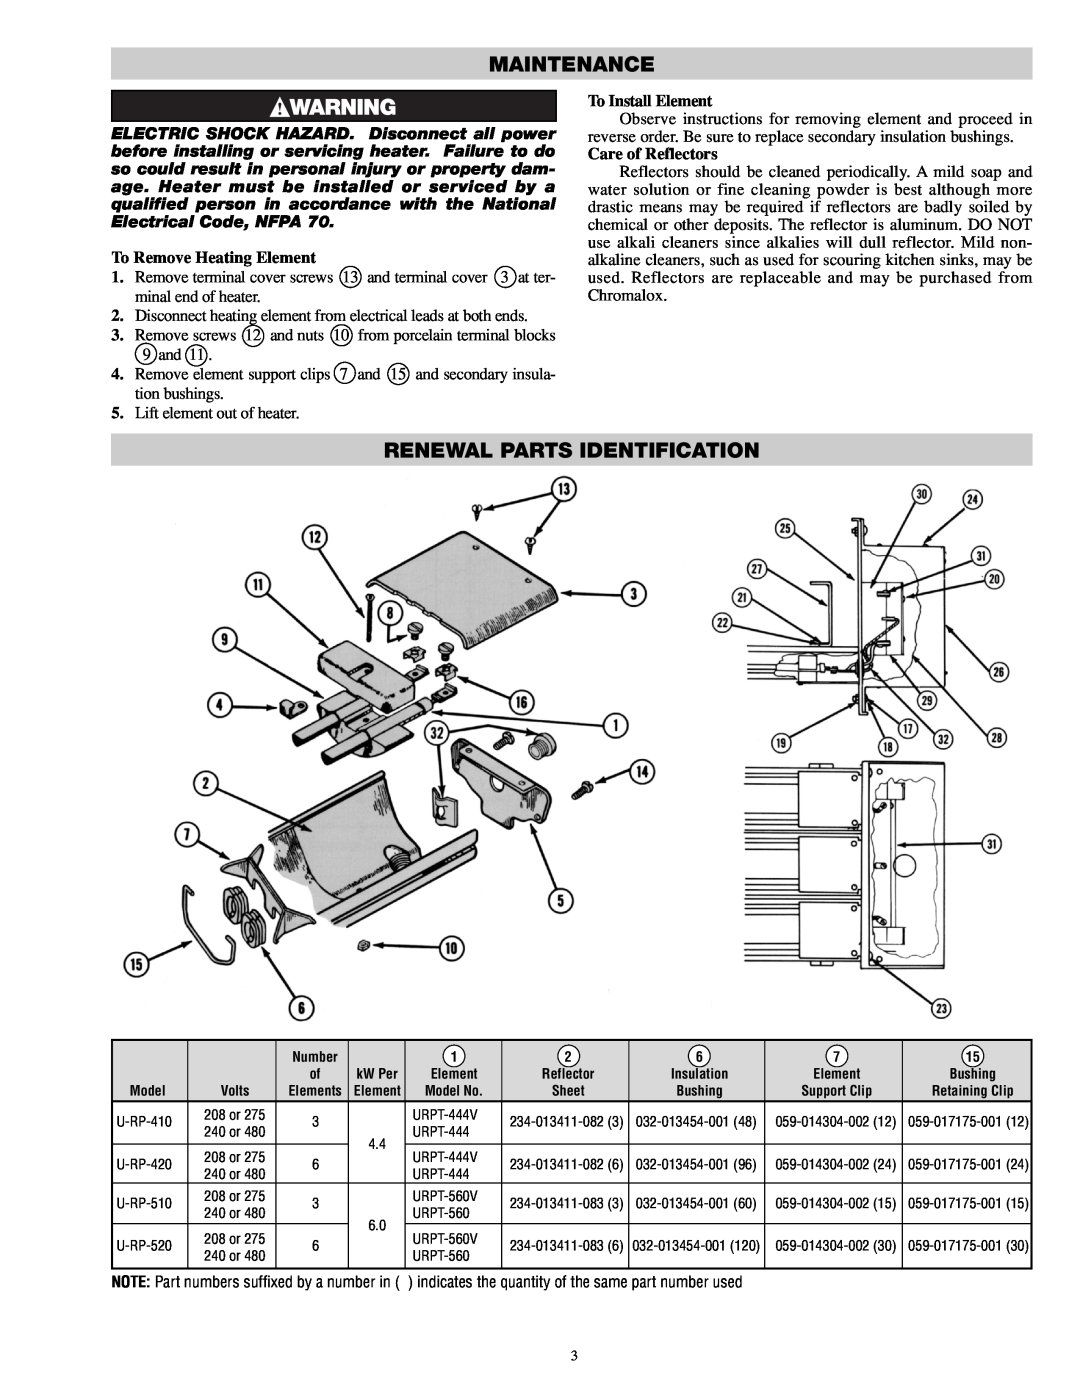 Chromalox PG424-1, PG424-2 Maintenance, Renewal Parts Identification, To Remove Heating Element, To Install Element 